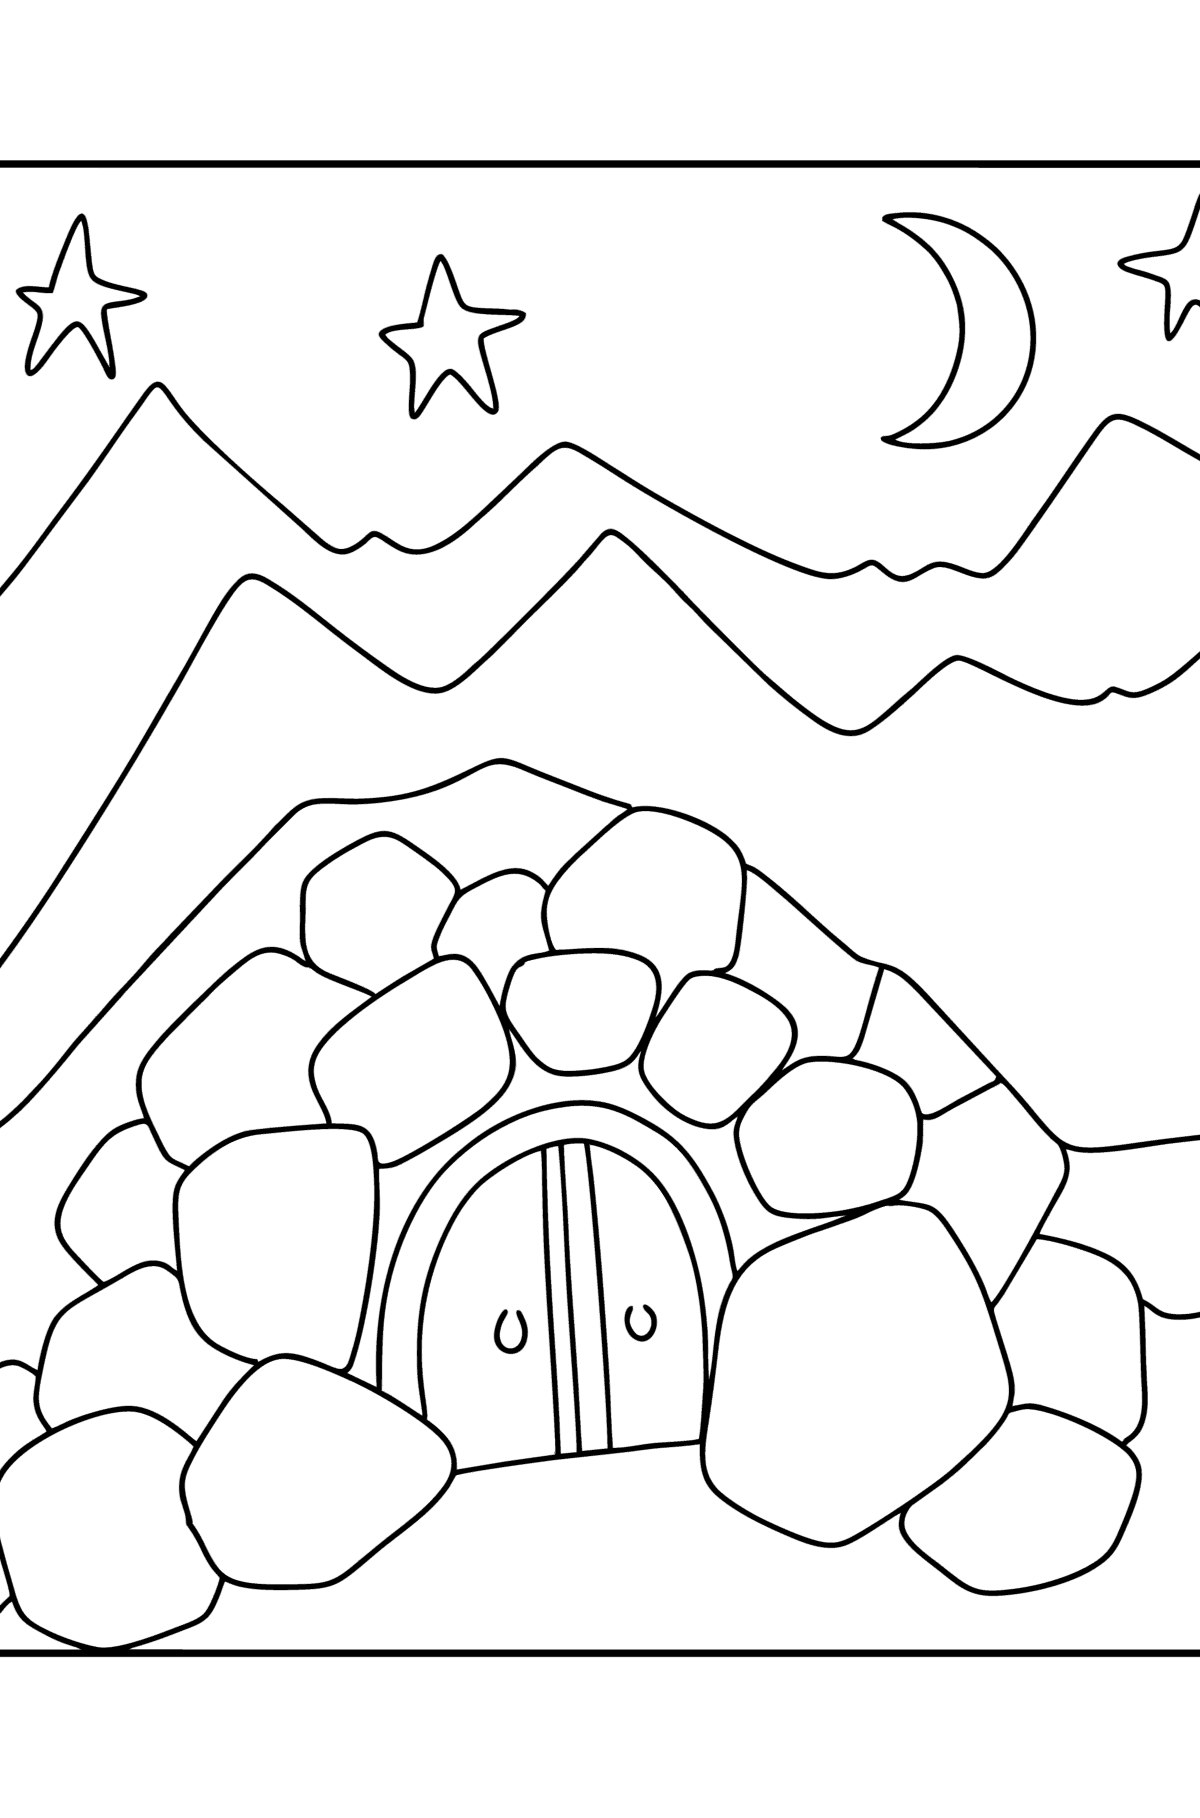 Ali Baba Cave coloring page - Coloring Pages for Kids